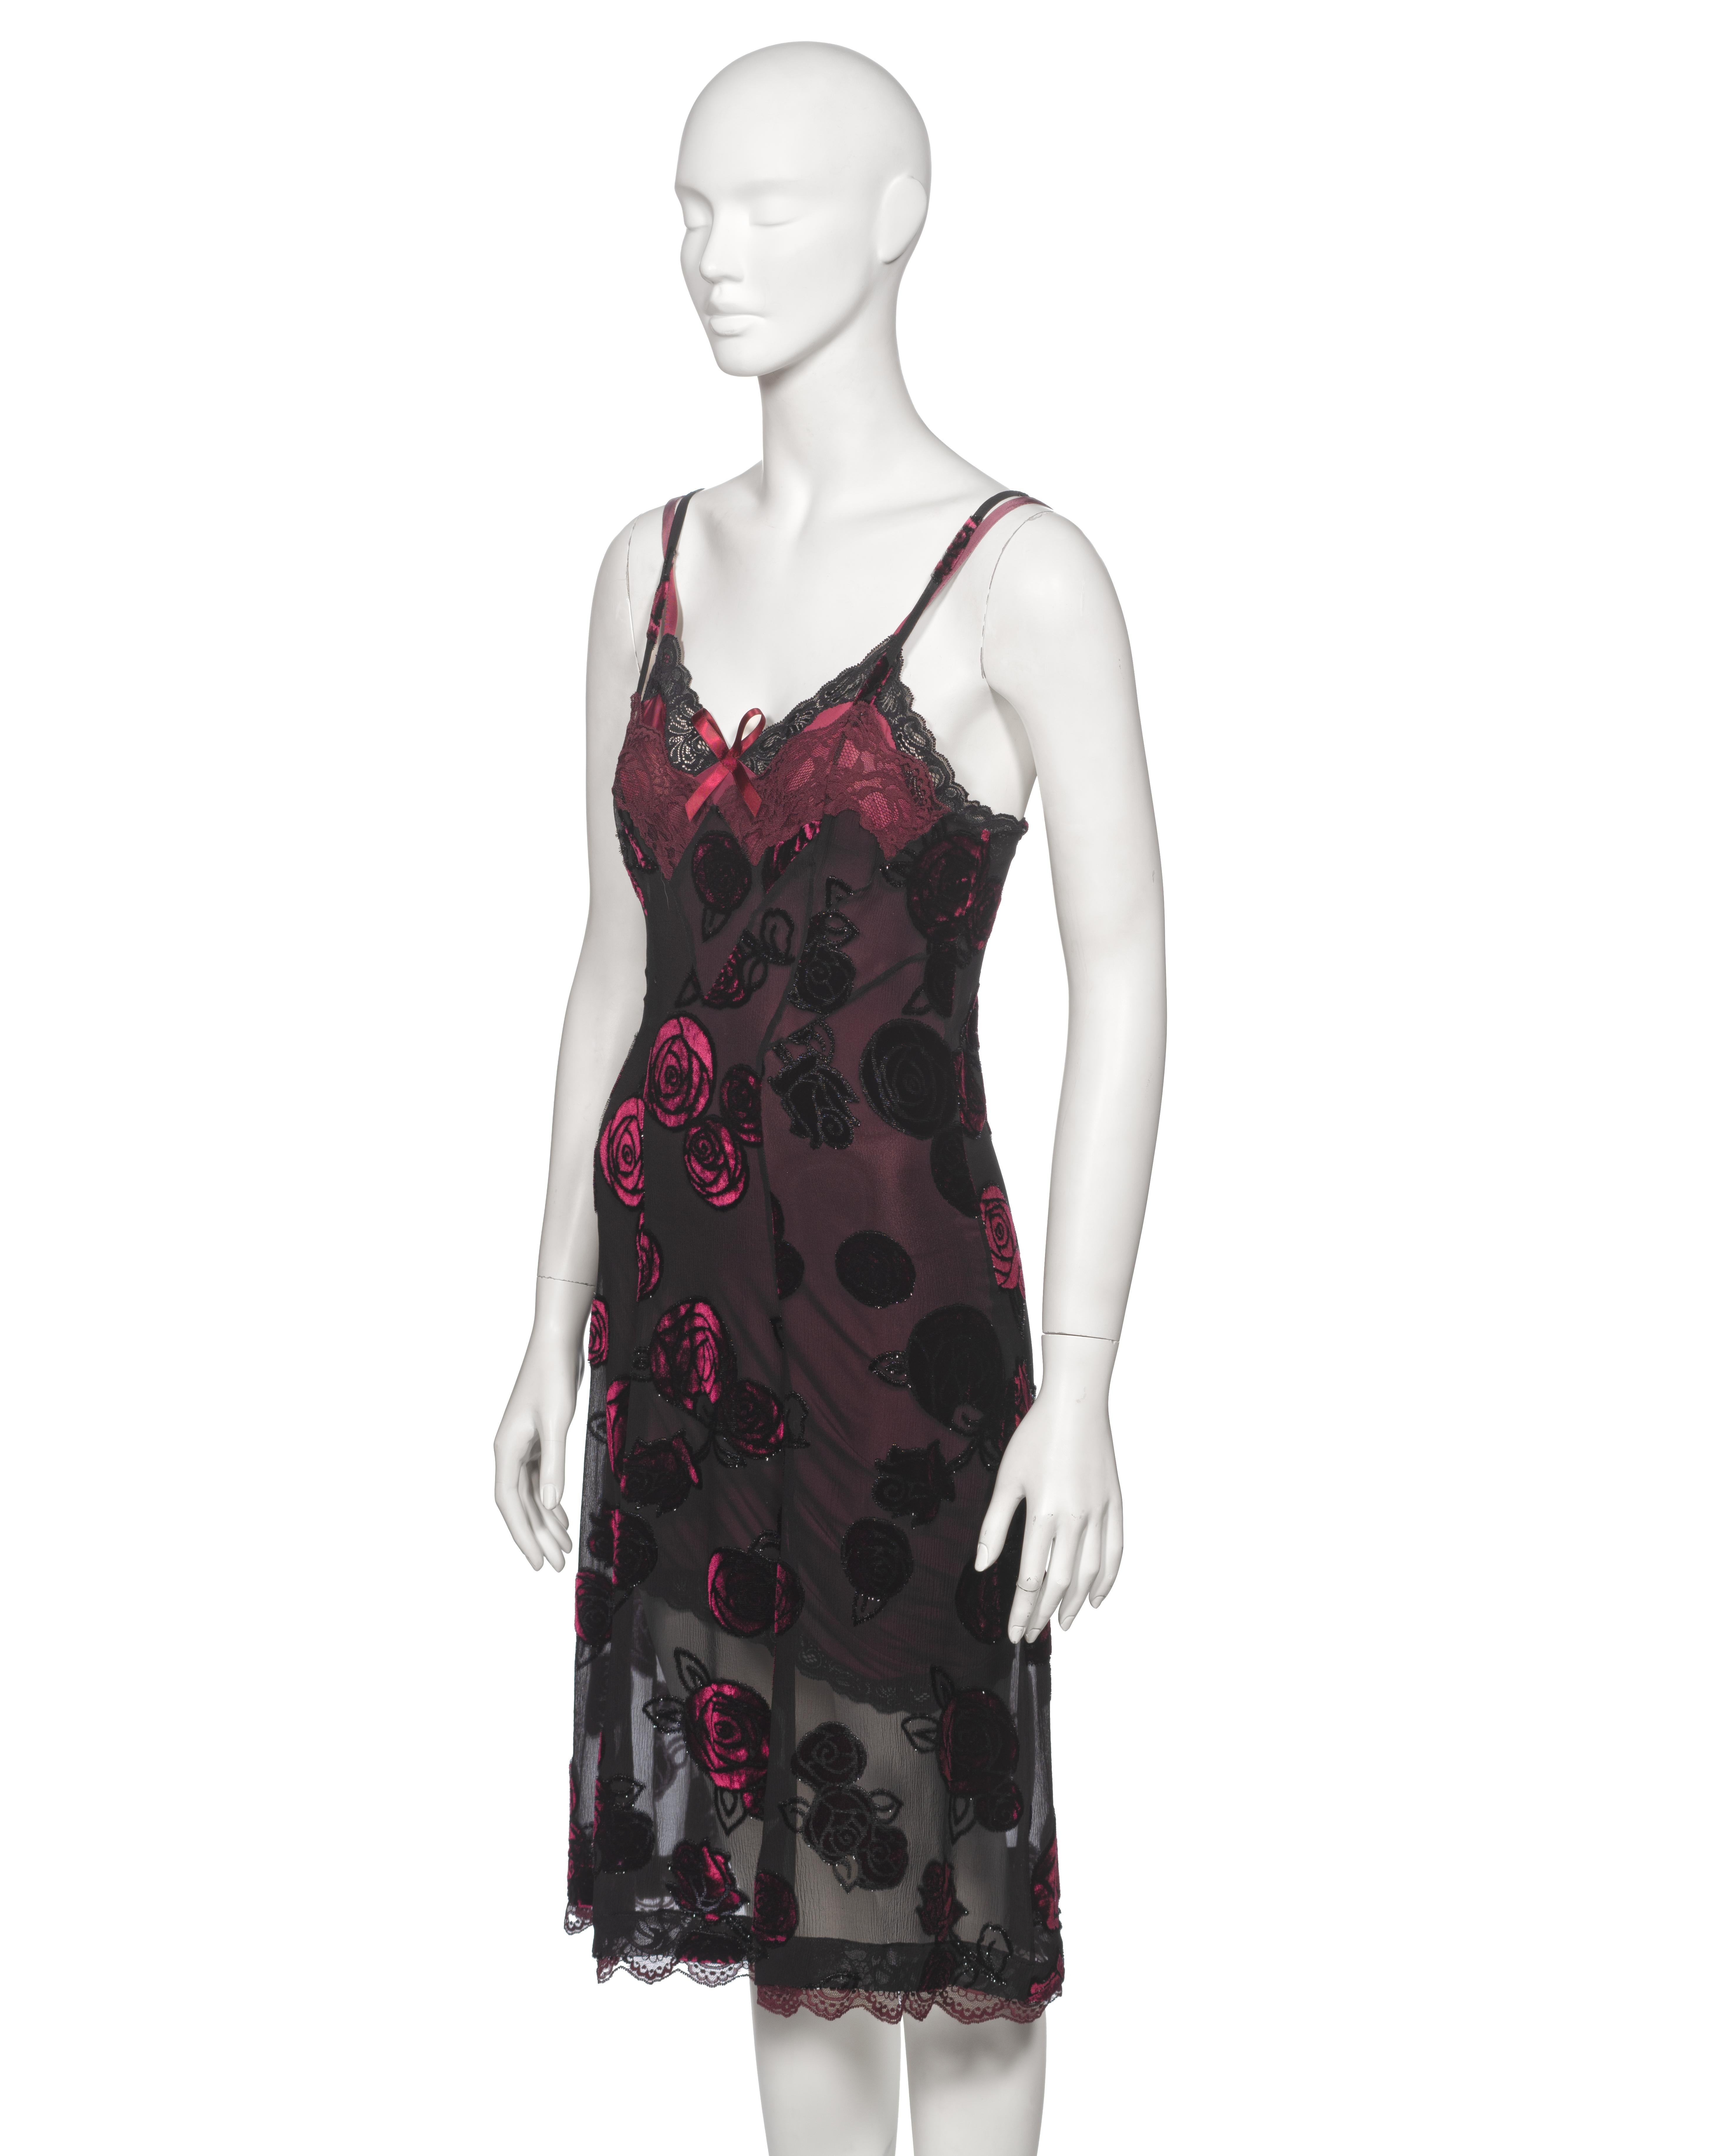 Christian Dior by John Galliano Double Layered Bordeaux Slip Dress, FW 2005 For Sale 7